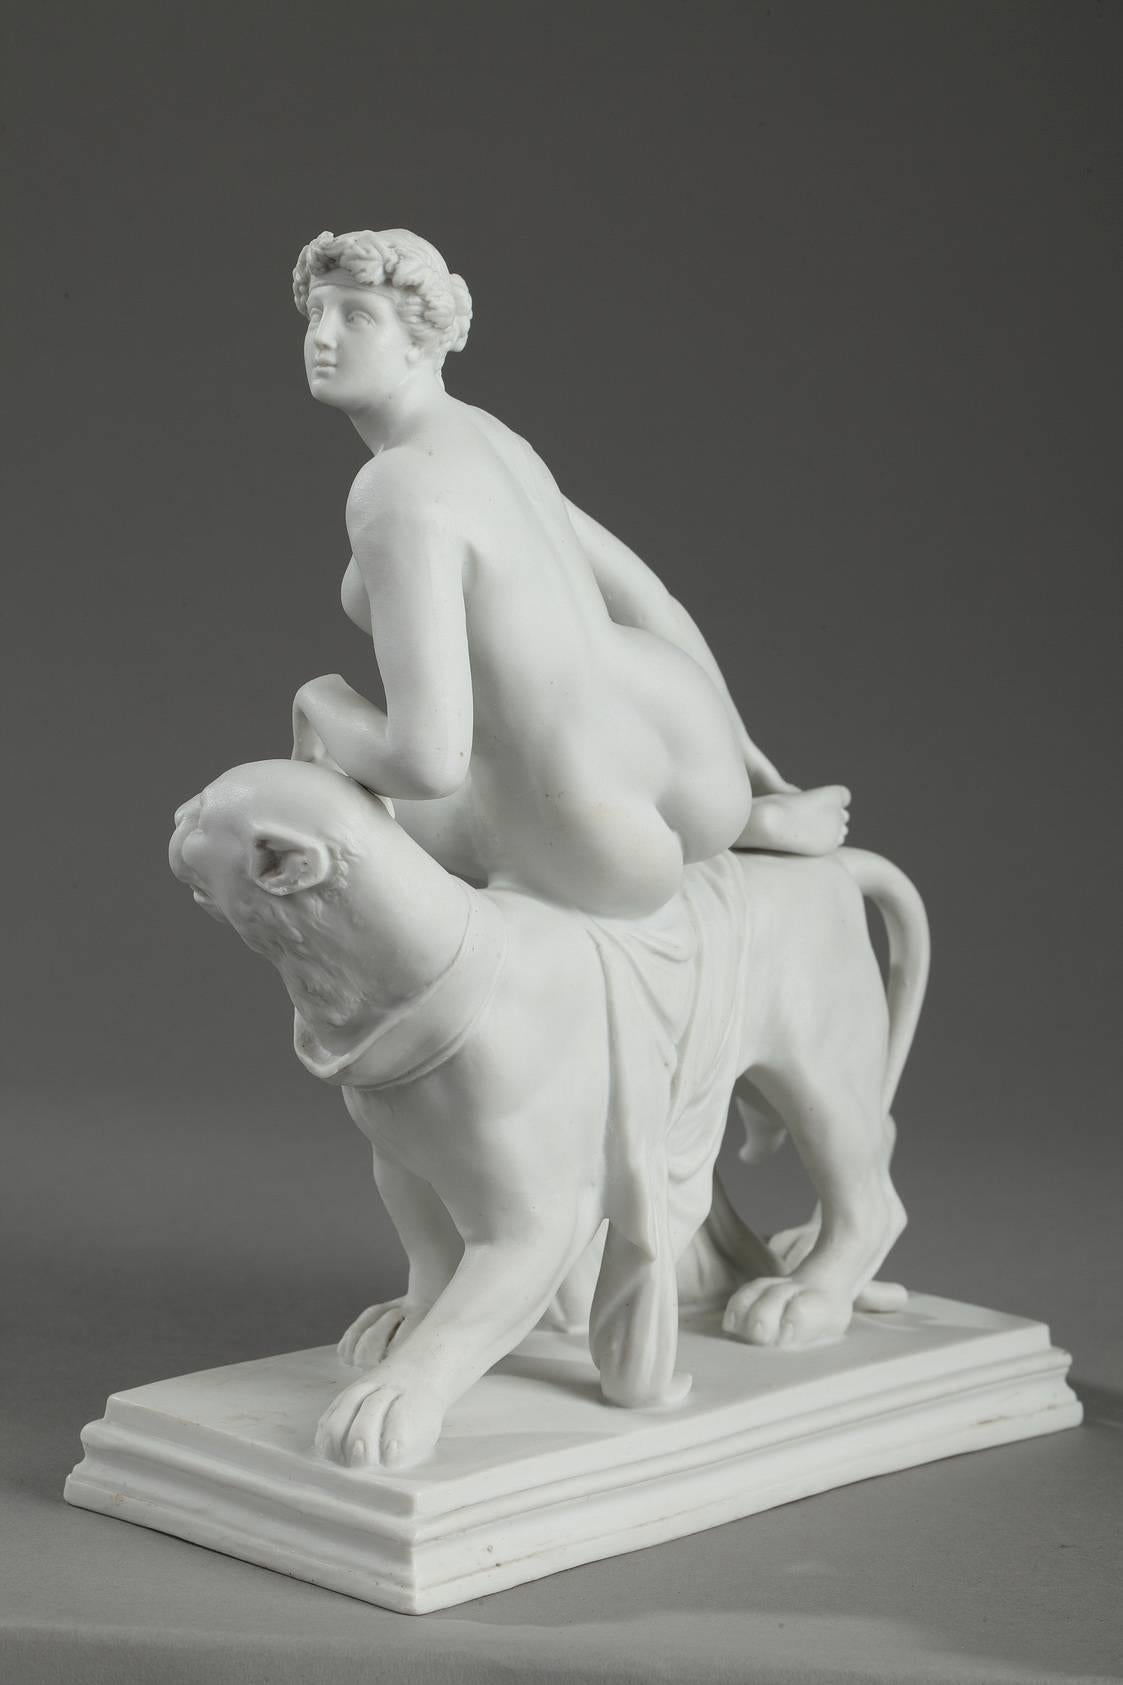 Mid-19th century, French biscuit porcelain group of Ariane riding a panther, after a model conceived by the Dutch sculptor Johann Heinrich Dannecker (1758-1841). He elaborated the design in 1803 for a sculpture commissioned by Moritz von Bethmann, a